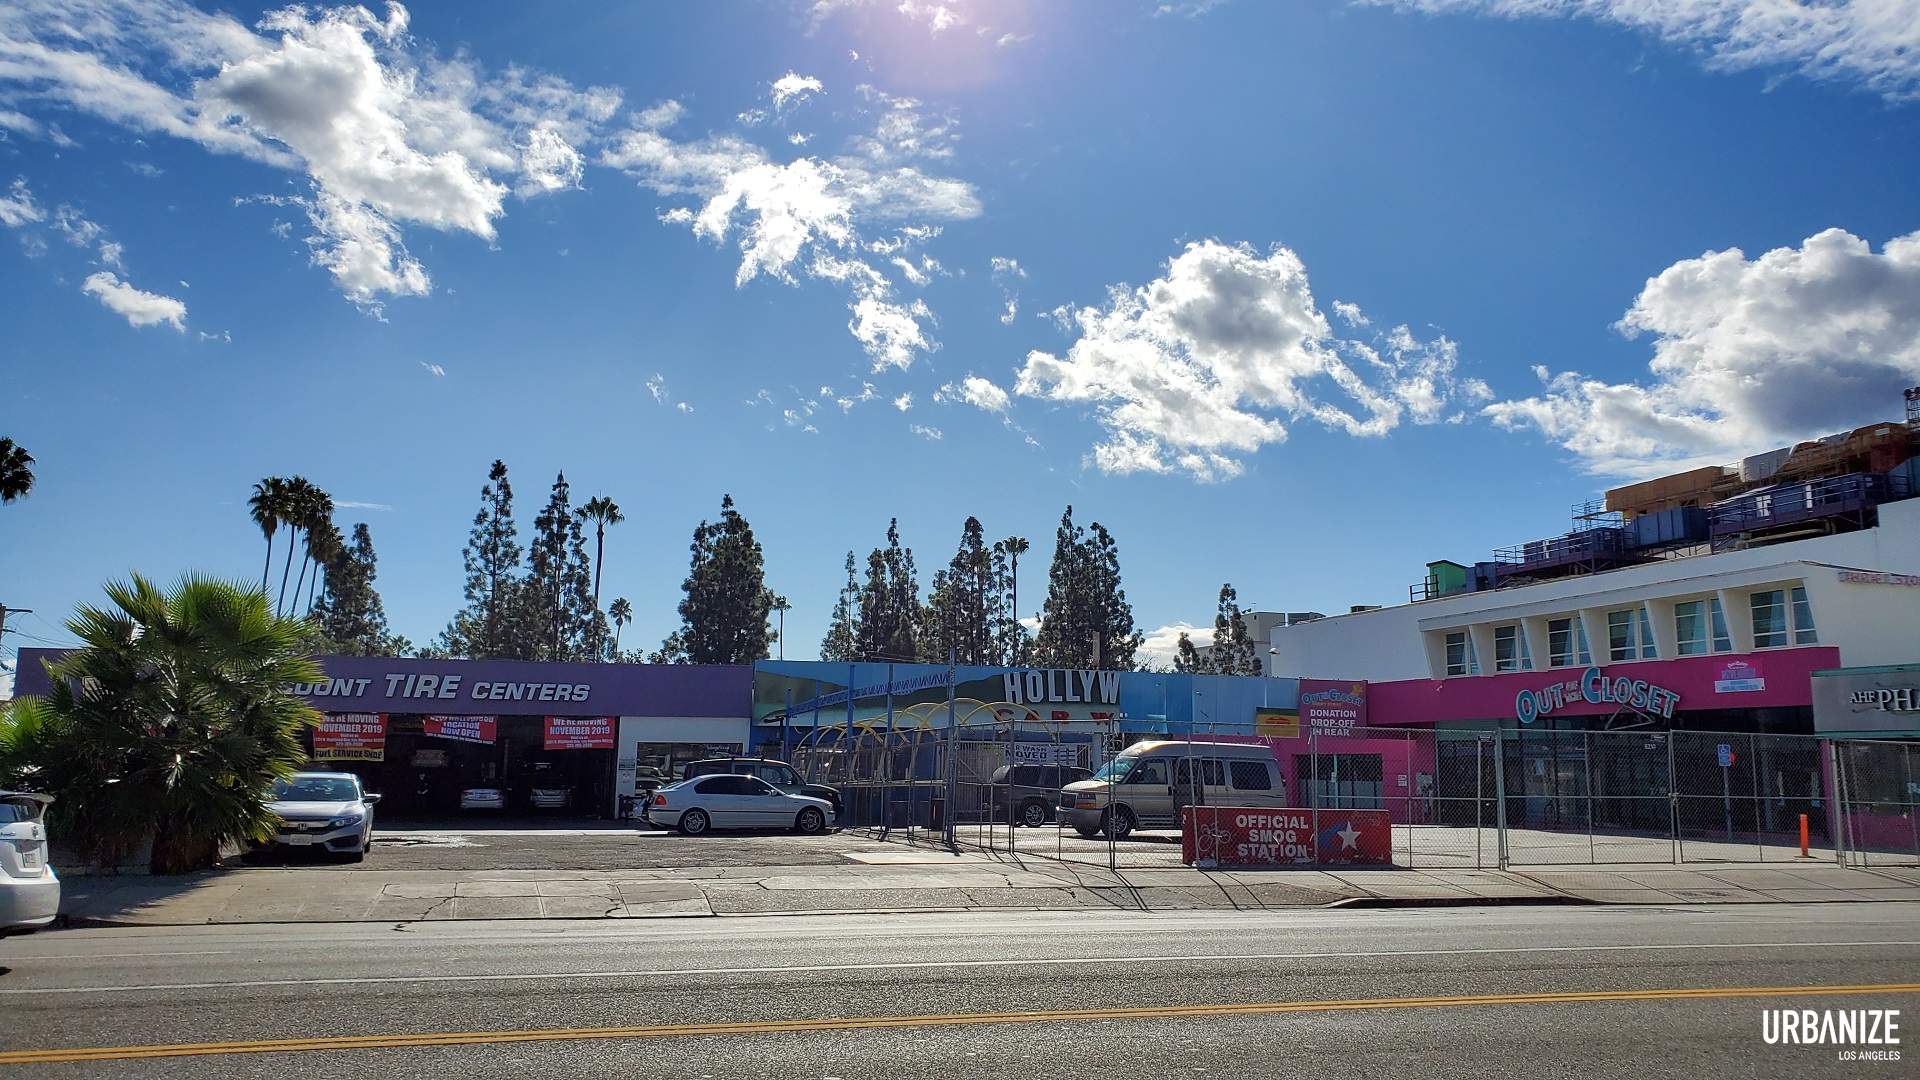 Splashy New Project Proposed for Iconic Sunset Strip Location